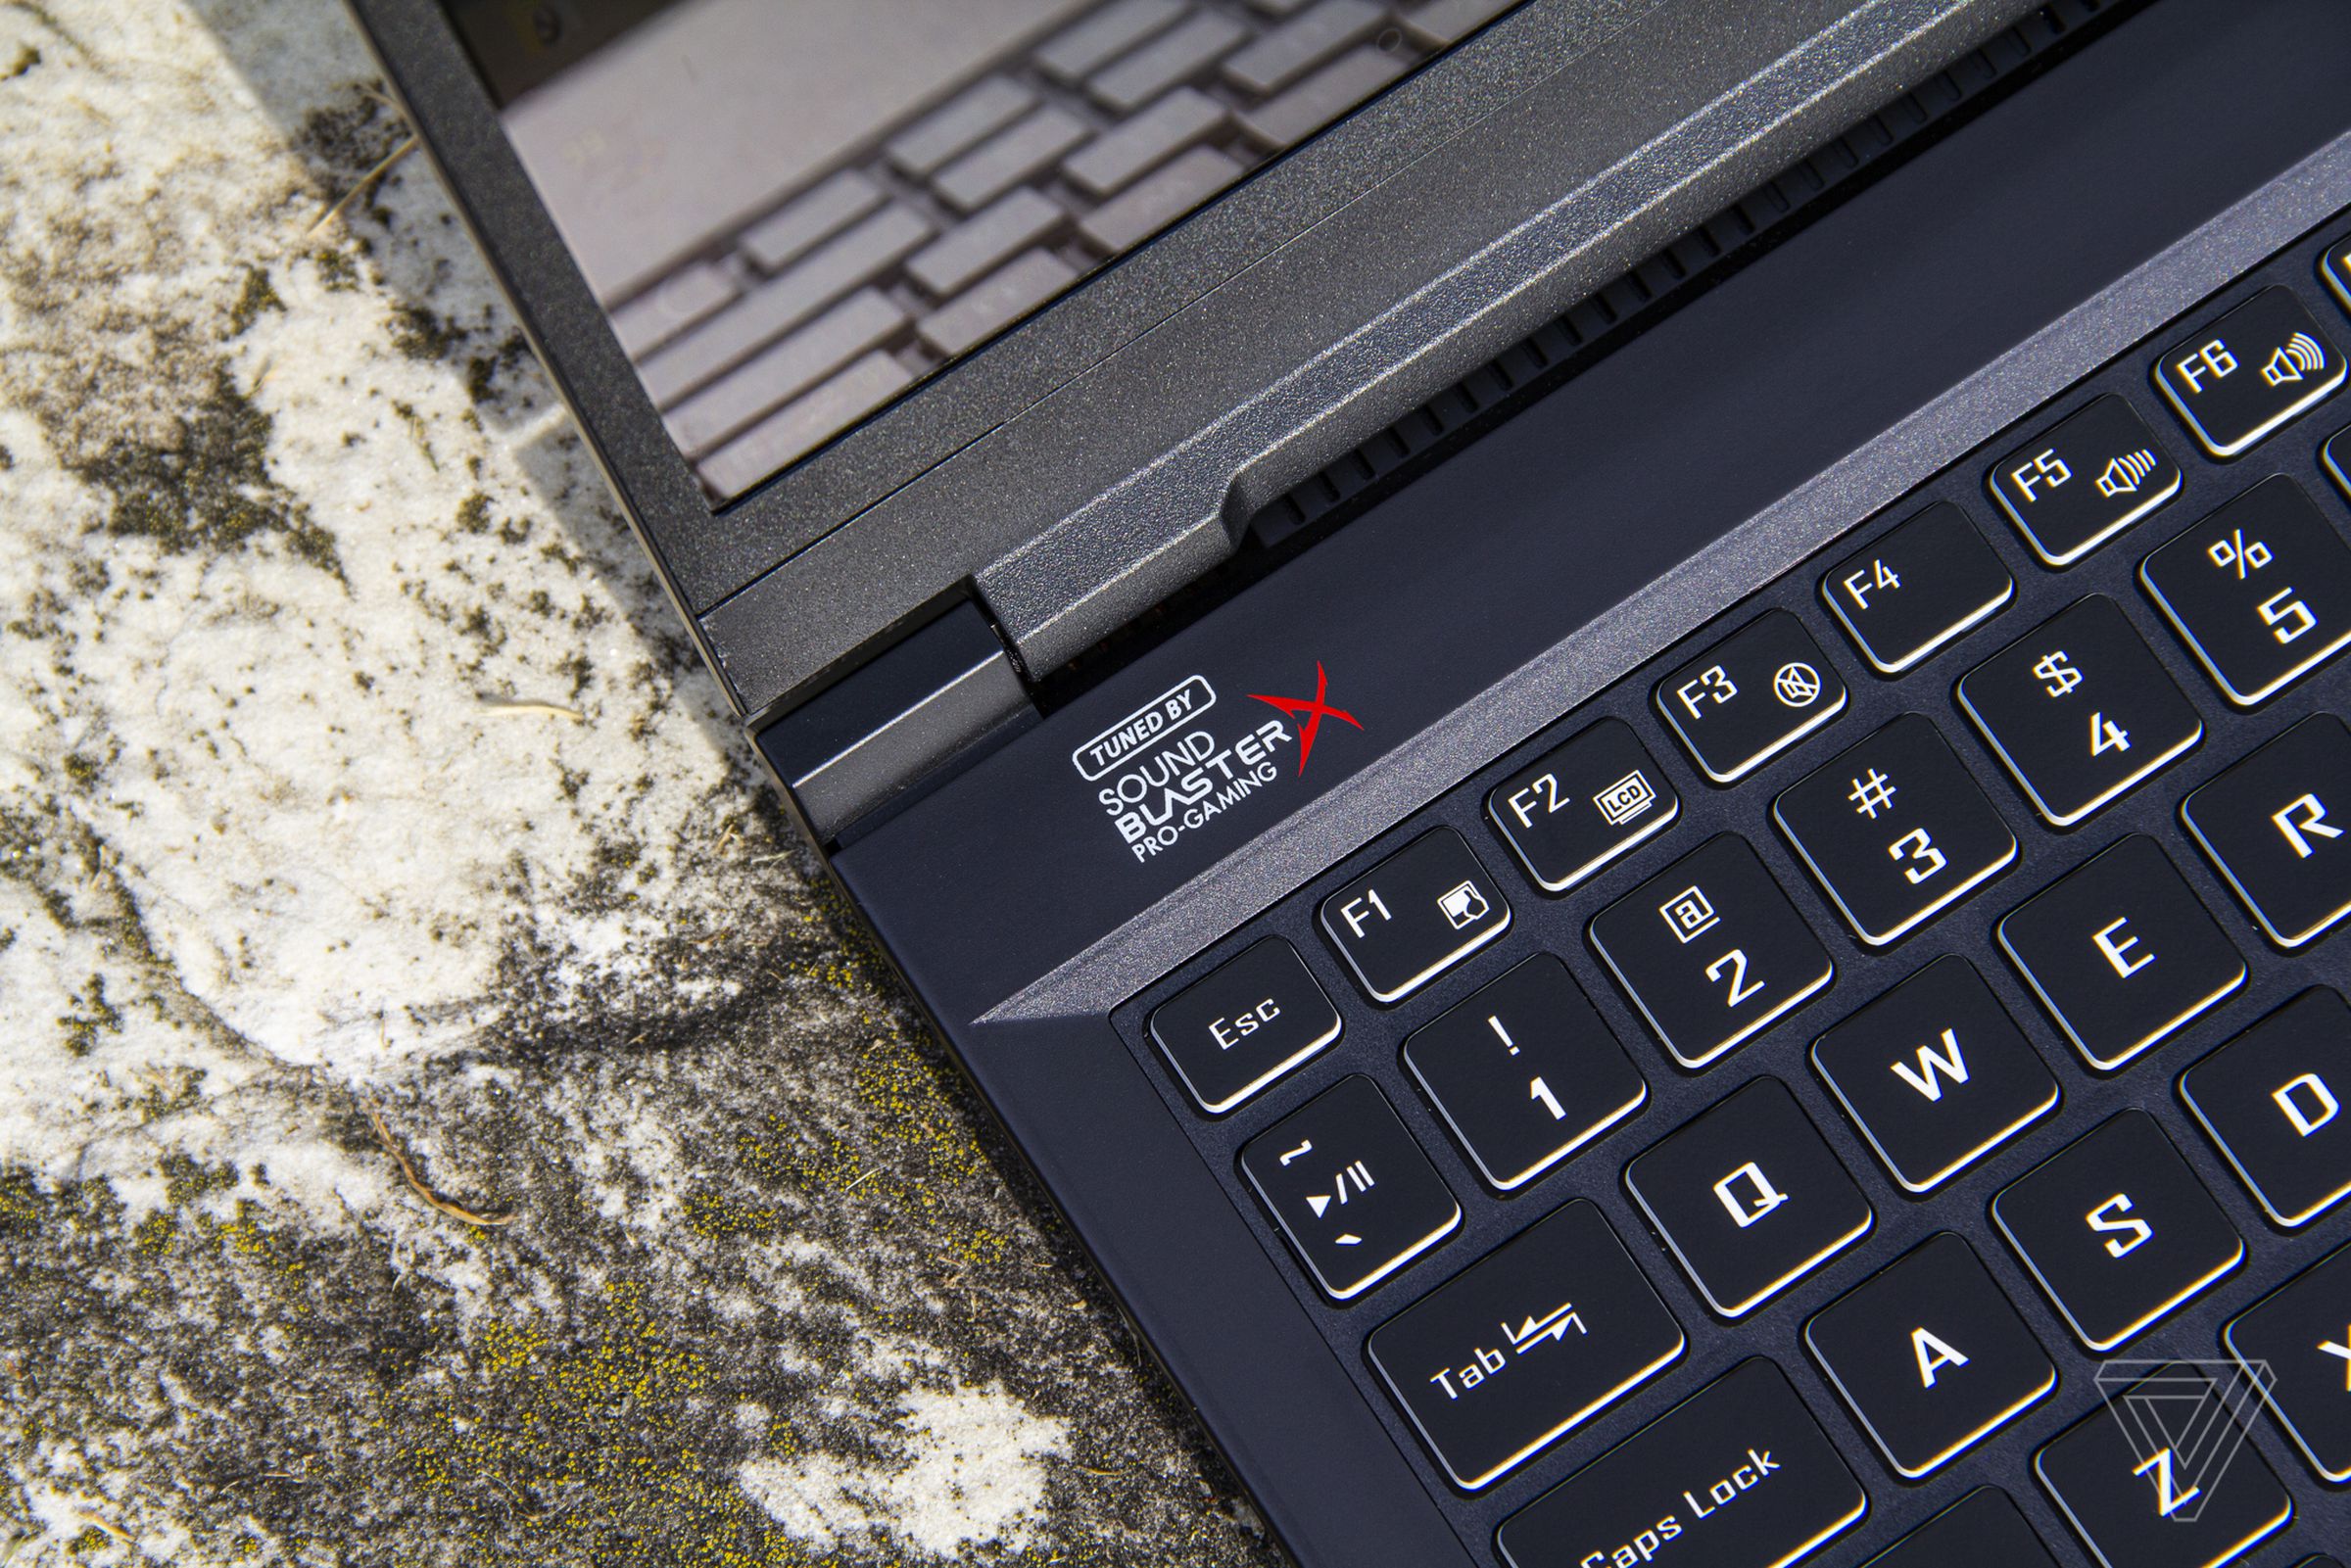 The Sound Blaster Pro-Gaming logo on the left corner of the Origin EVO15-S keyboard deck, up close.